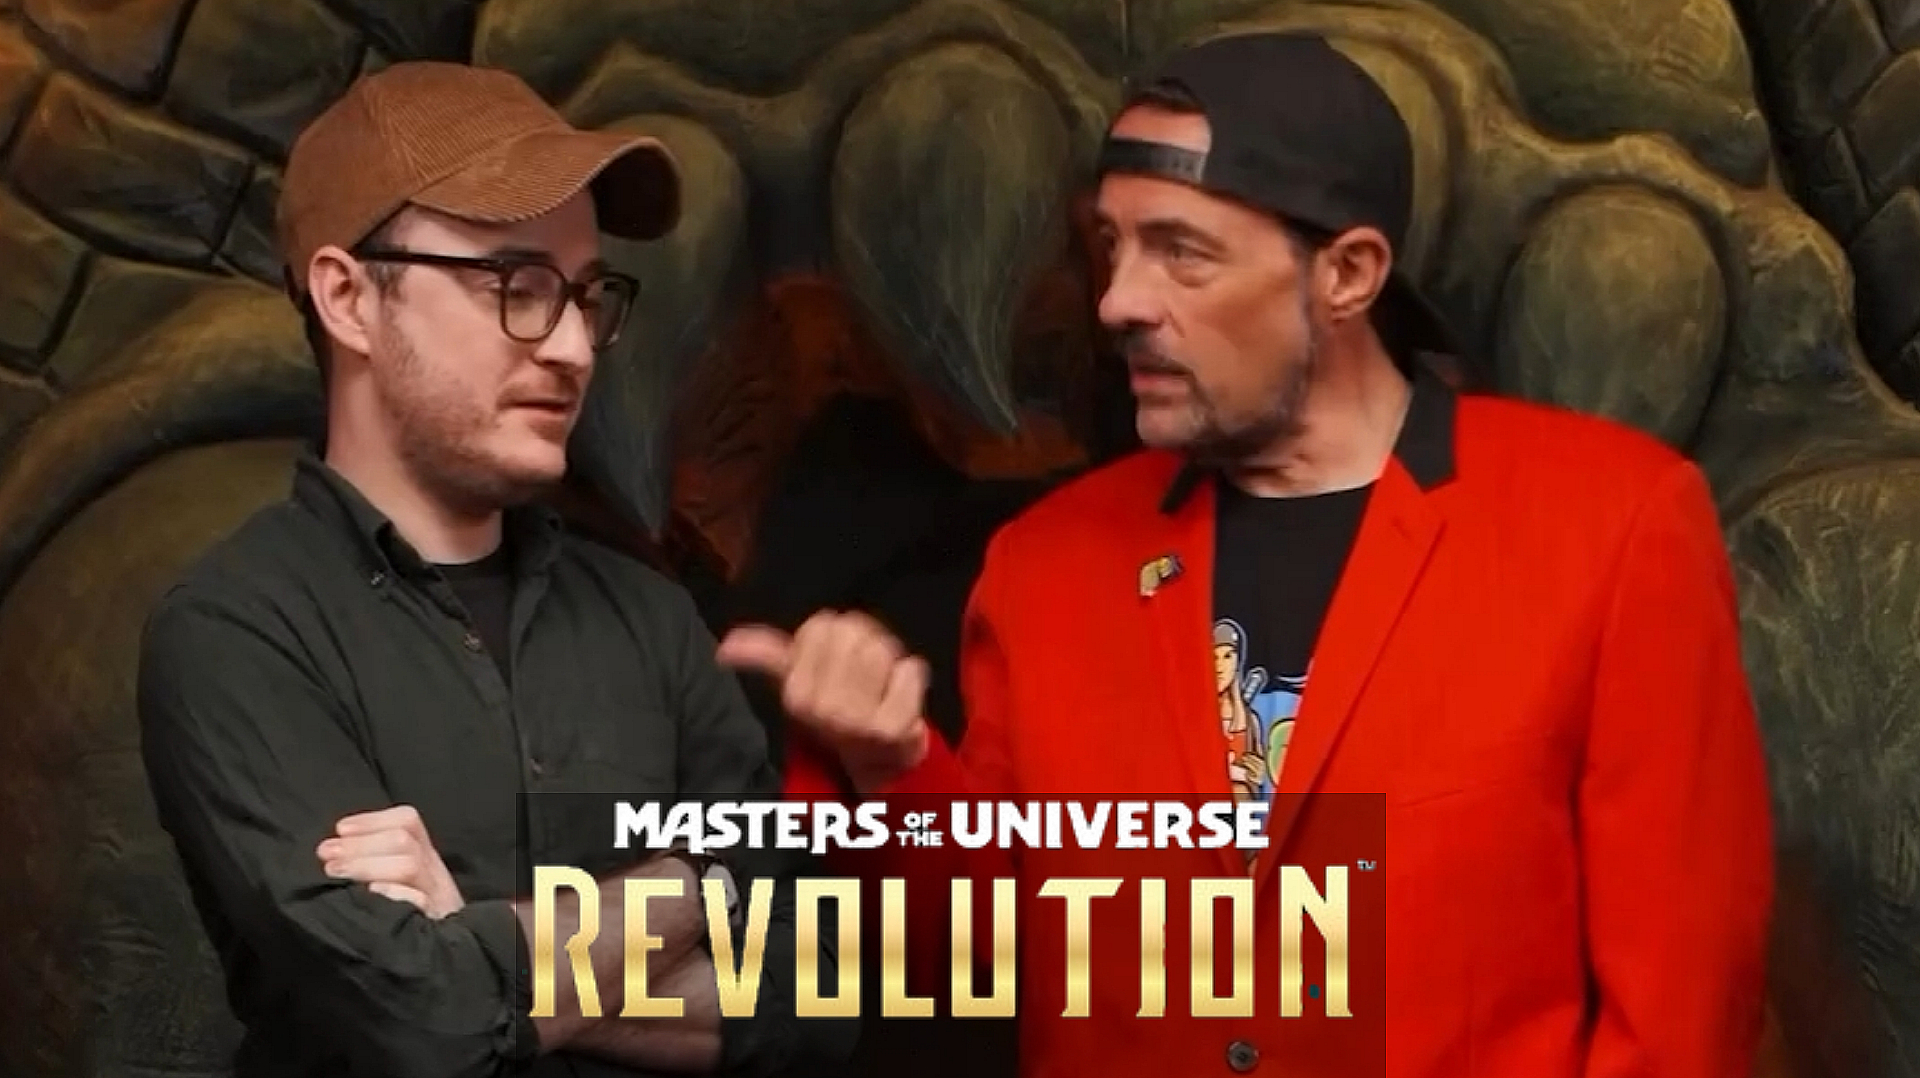 Orko actor Griffin Newman explains to Kevin Smith what he adores about Masters of the Universe Revelation and Revolution